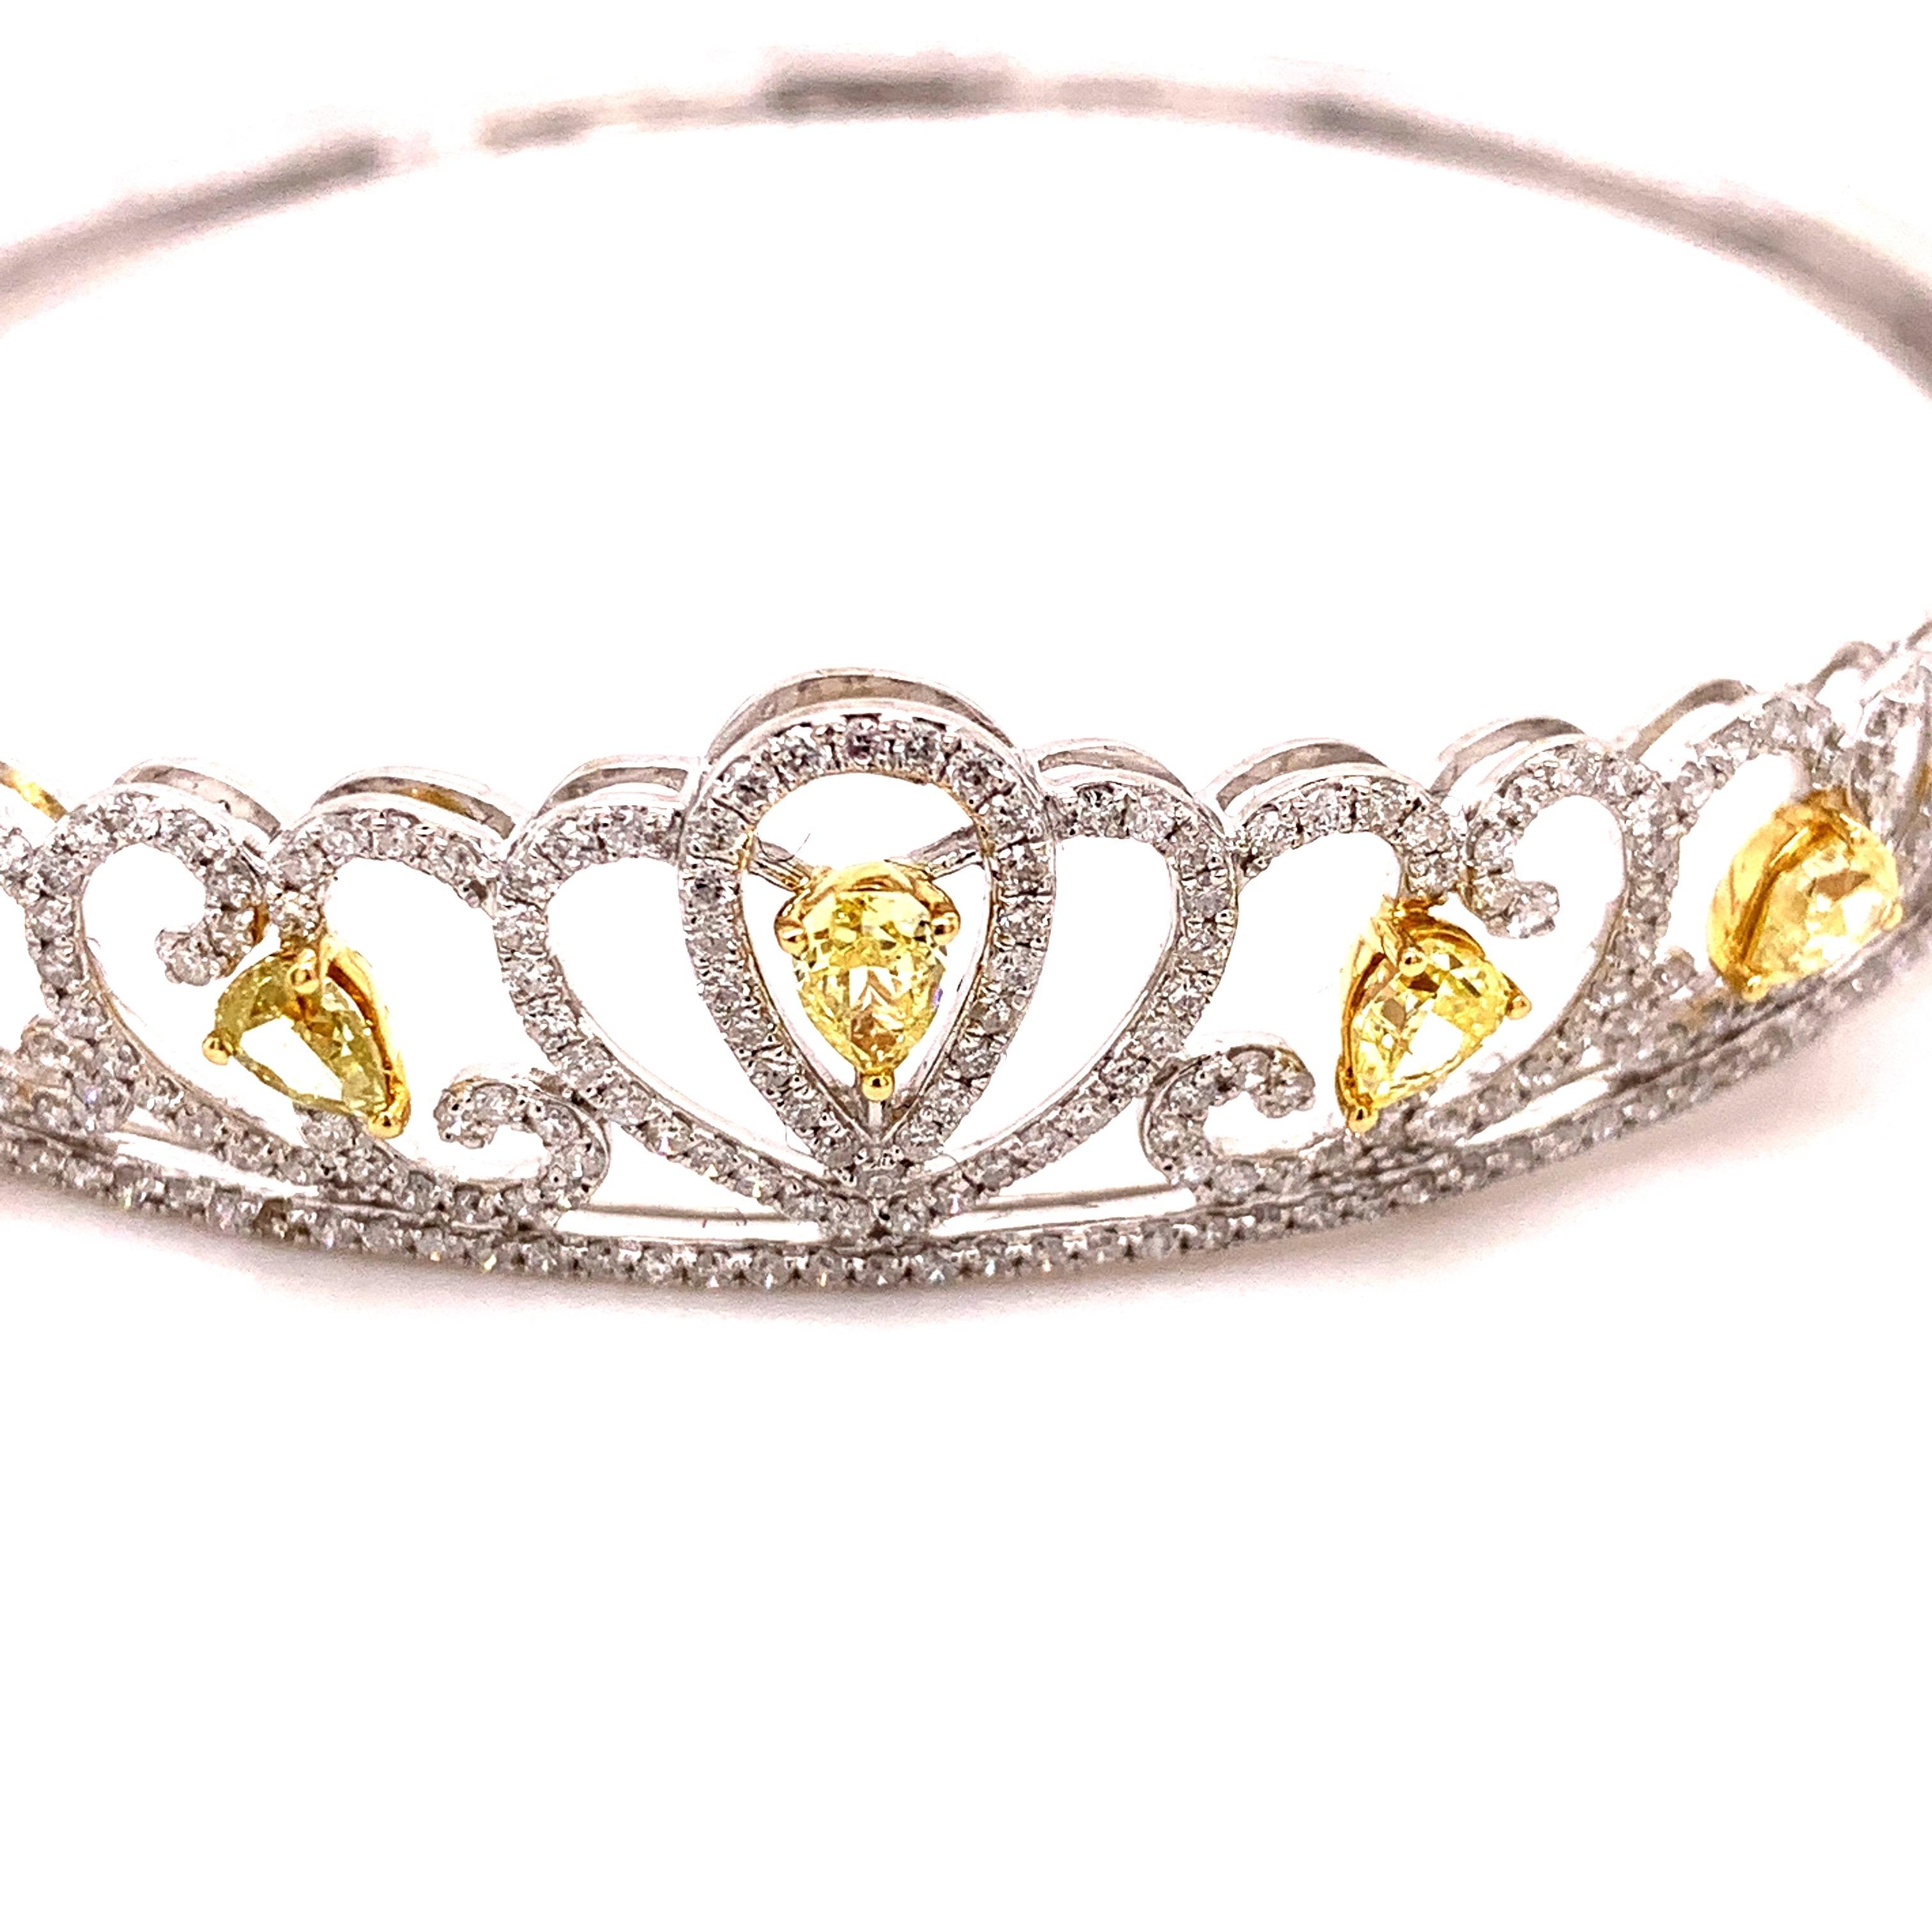 Stunning tiara design fancy yellow diamond bangle. Sparkling, pear brilliant cut, 0.91 carat, natural fancy yellow diamonds encased in open basket mounting with three bead prongs, accented with round brilliant cut diamonds. Handcrafted high polished